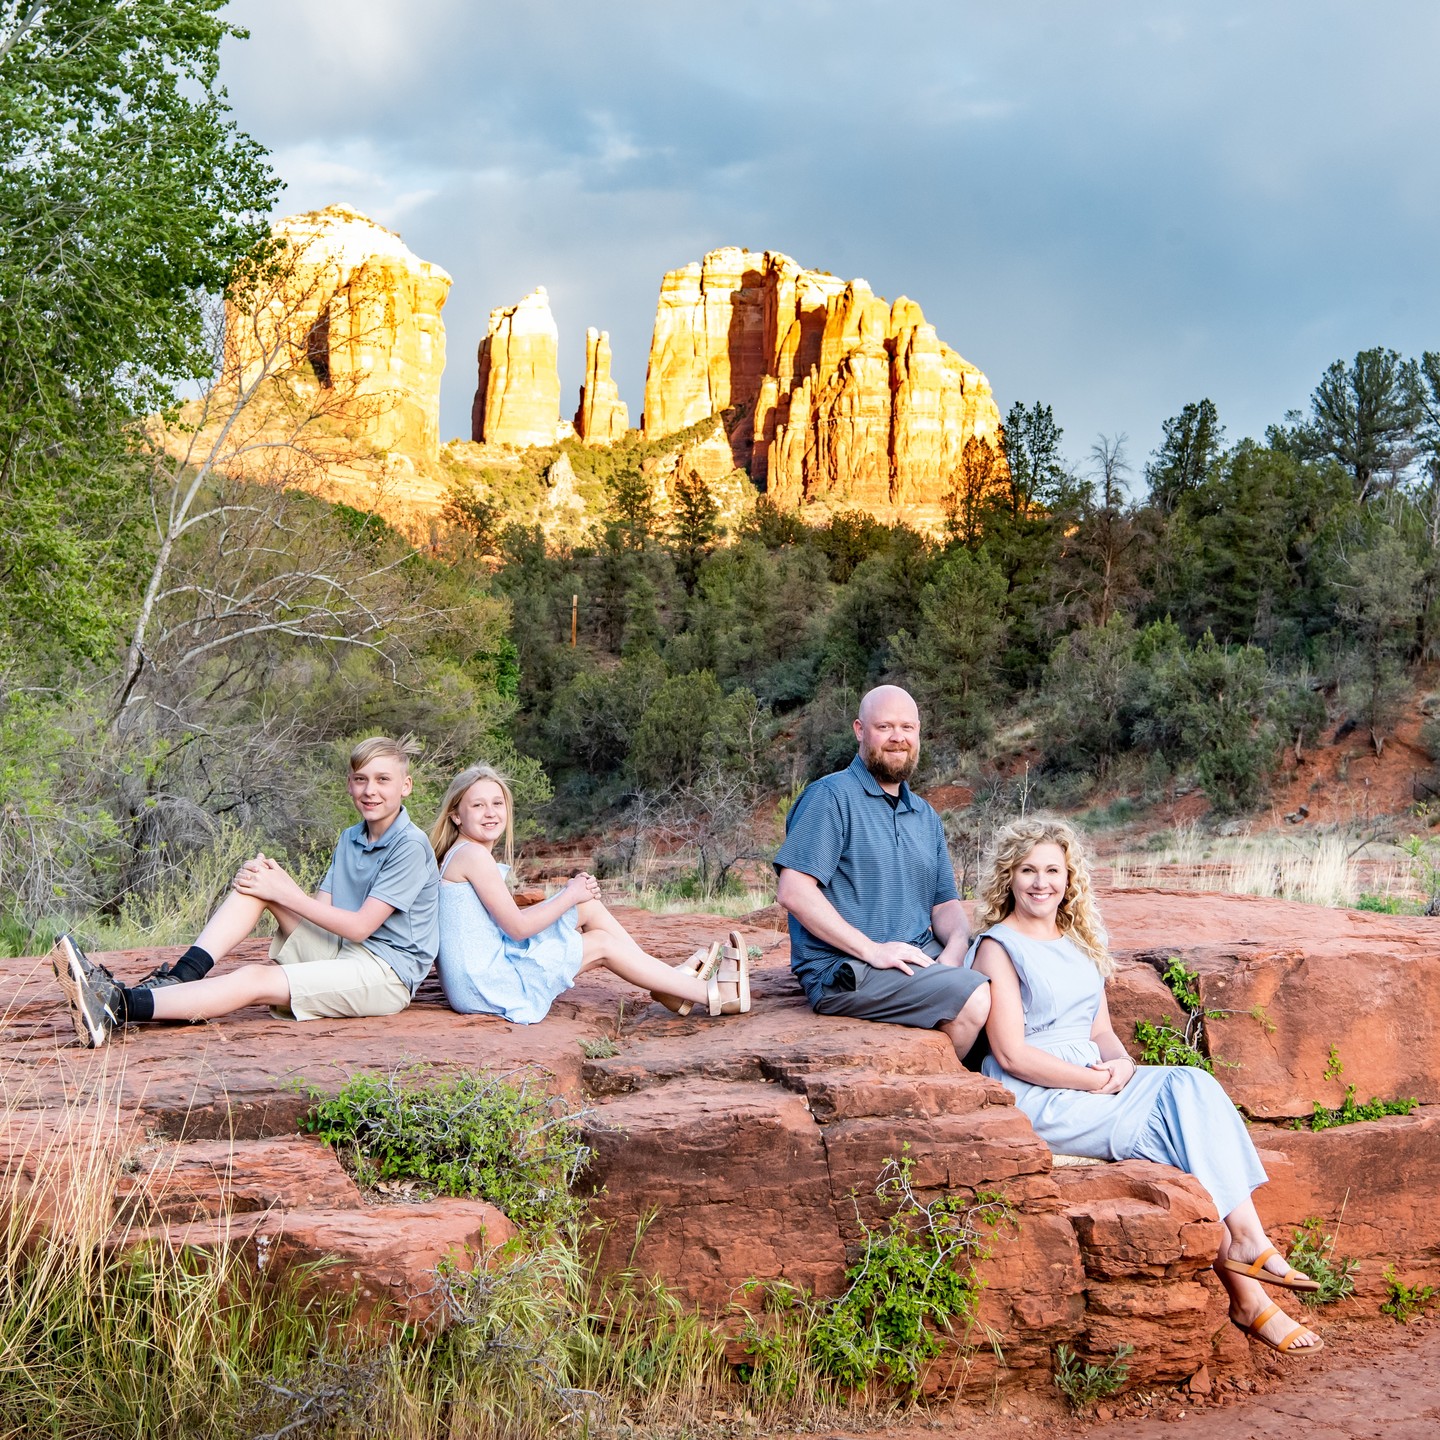 Family portrait session at Red Rock Crossing. #sedonafamilyportraitphotographer #sedonafamilyphotographer #sedonafamilyvacation #sedonafamilyphoto #sedonafamilyphotography #sedonaportraitphotographer #sedonaportraits #sedonaportraitphotography #sedonaphotographer #redrockcrossing #flagstafffamilyphotographer #flagstafffamilyphotography #sedonafamilyportraits #flagstaffphotographer #prescottfamilyphotographer #prescottfamilyphotography #prescottphotographer #flagstaffportraitphotographer #prescottportraitphotographer #arizonafamilyphotographer #arizonafamilyphotography #arizonafamilyphotos #arizonafamilyphoto #sedonaazfamilyphotographer #sedonaarizonafamilyphotographer #sedonaazphotographer #sedonaazportraitphotographer